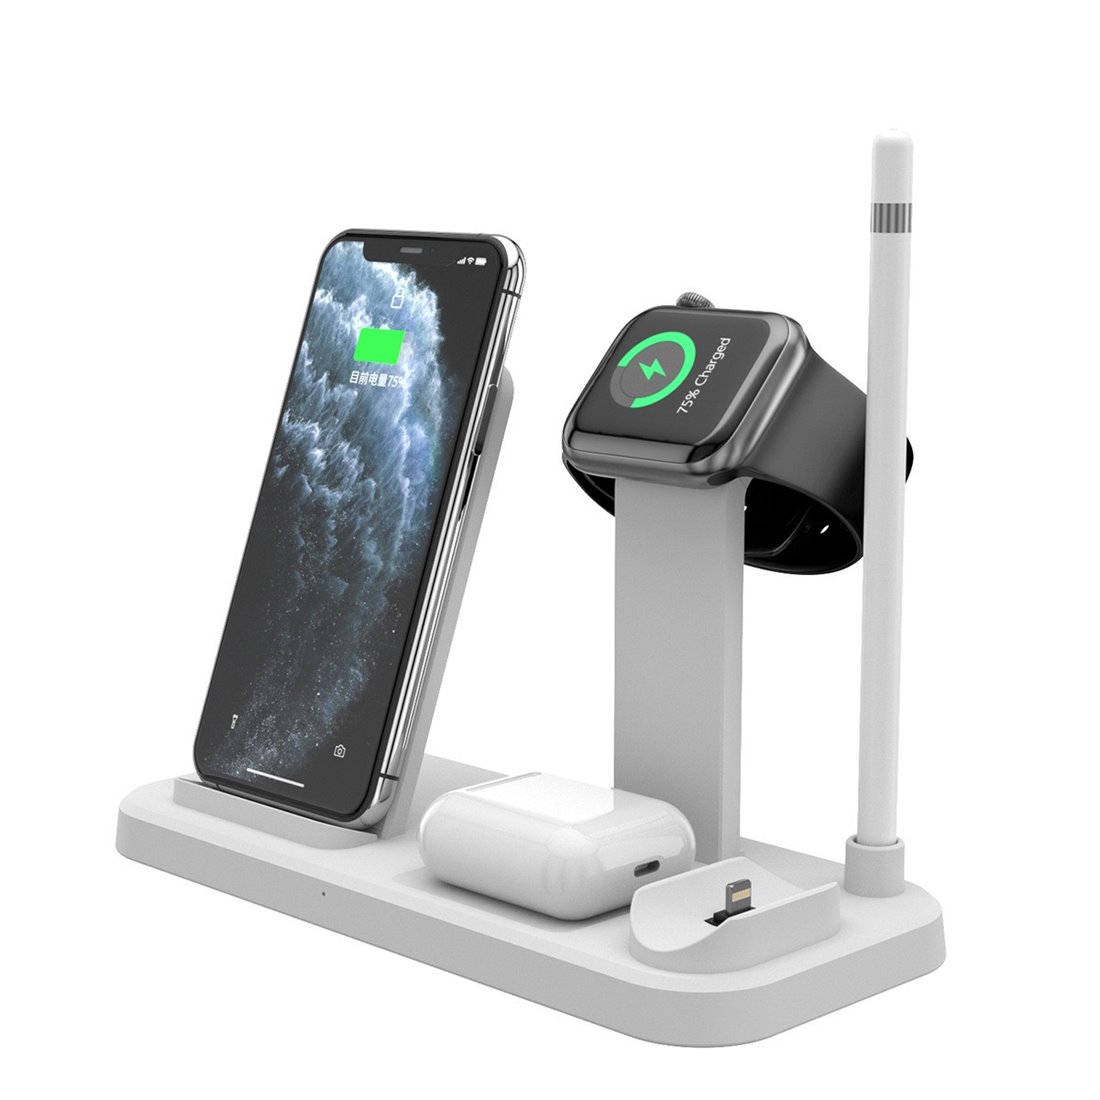 Multi-Function Charging Stand 4 in 1 wit